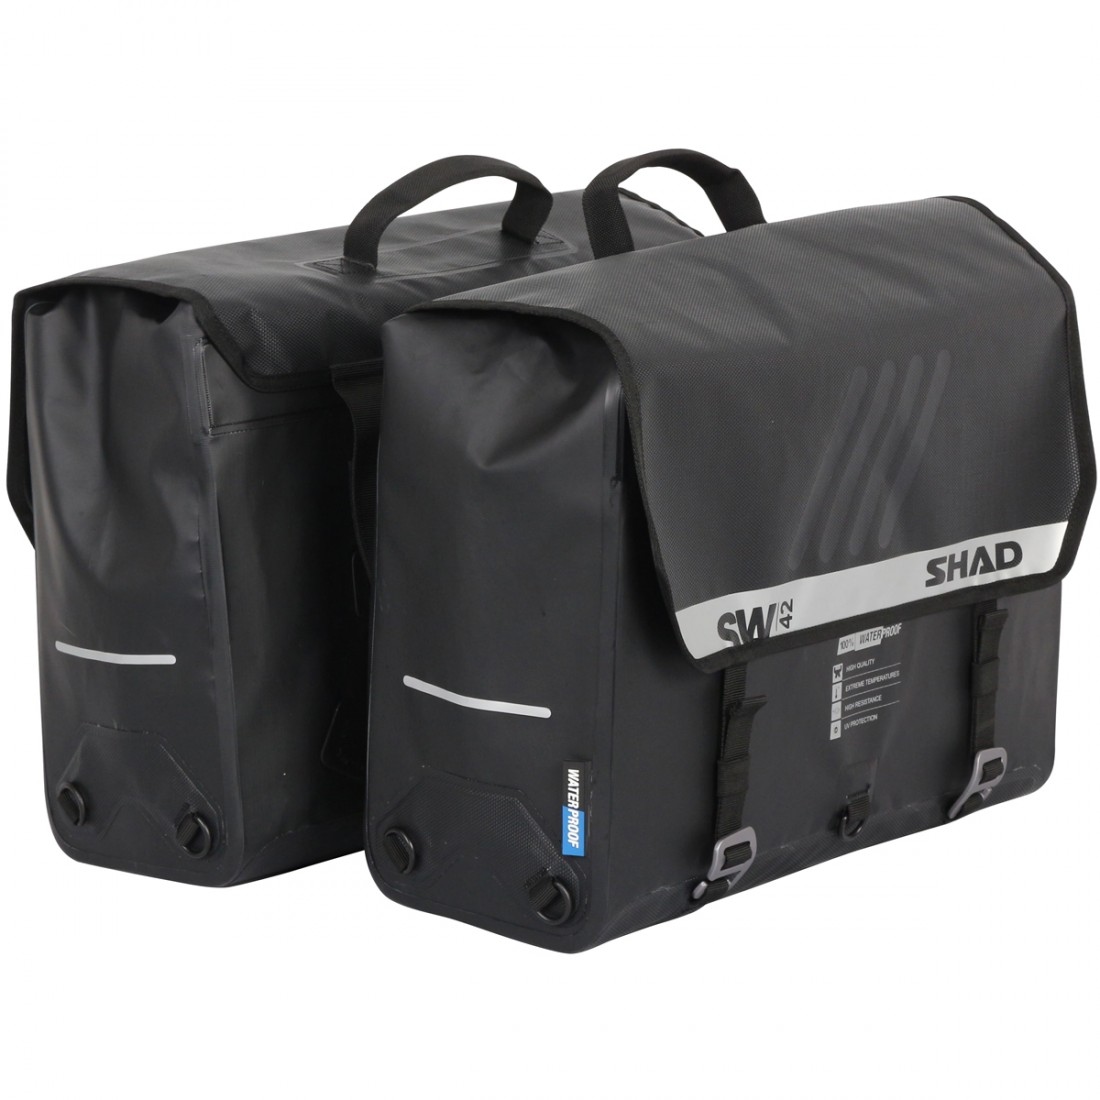 Shad Bolso impermeable SW-42 25 Lt